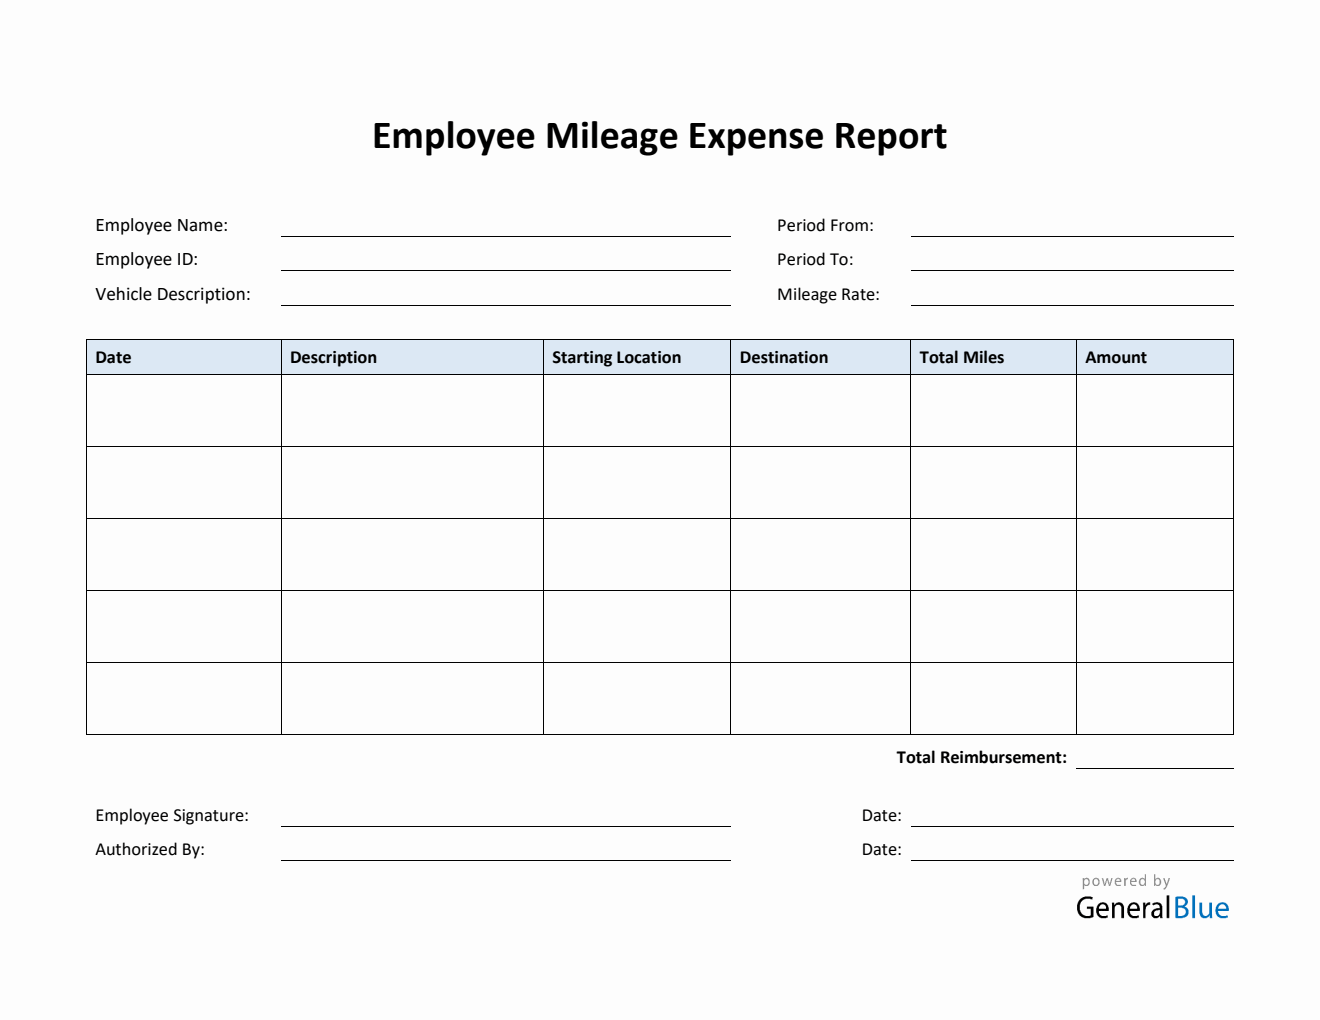 Editable Employee Mileage Expense Report Template in PDF